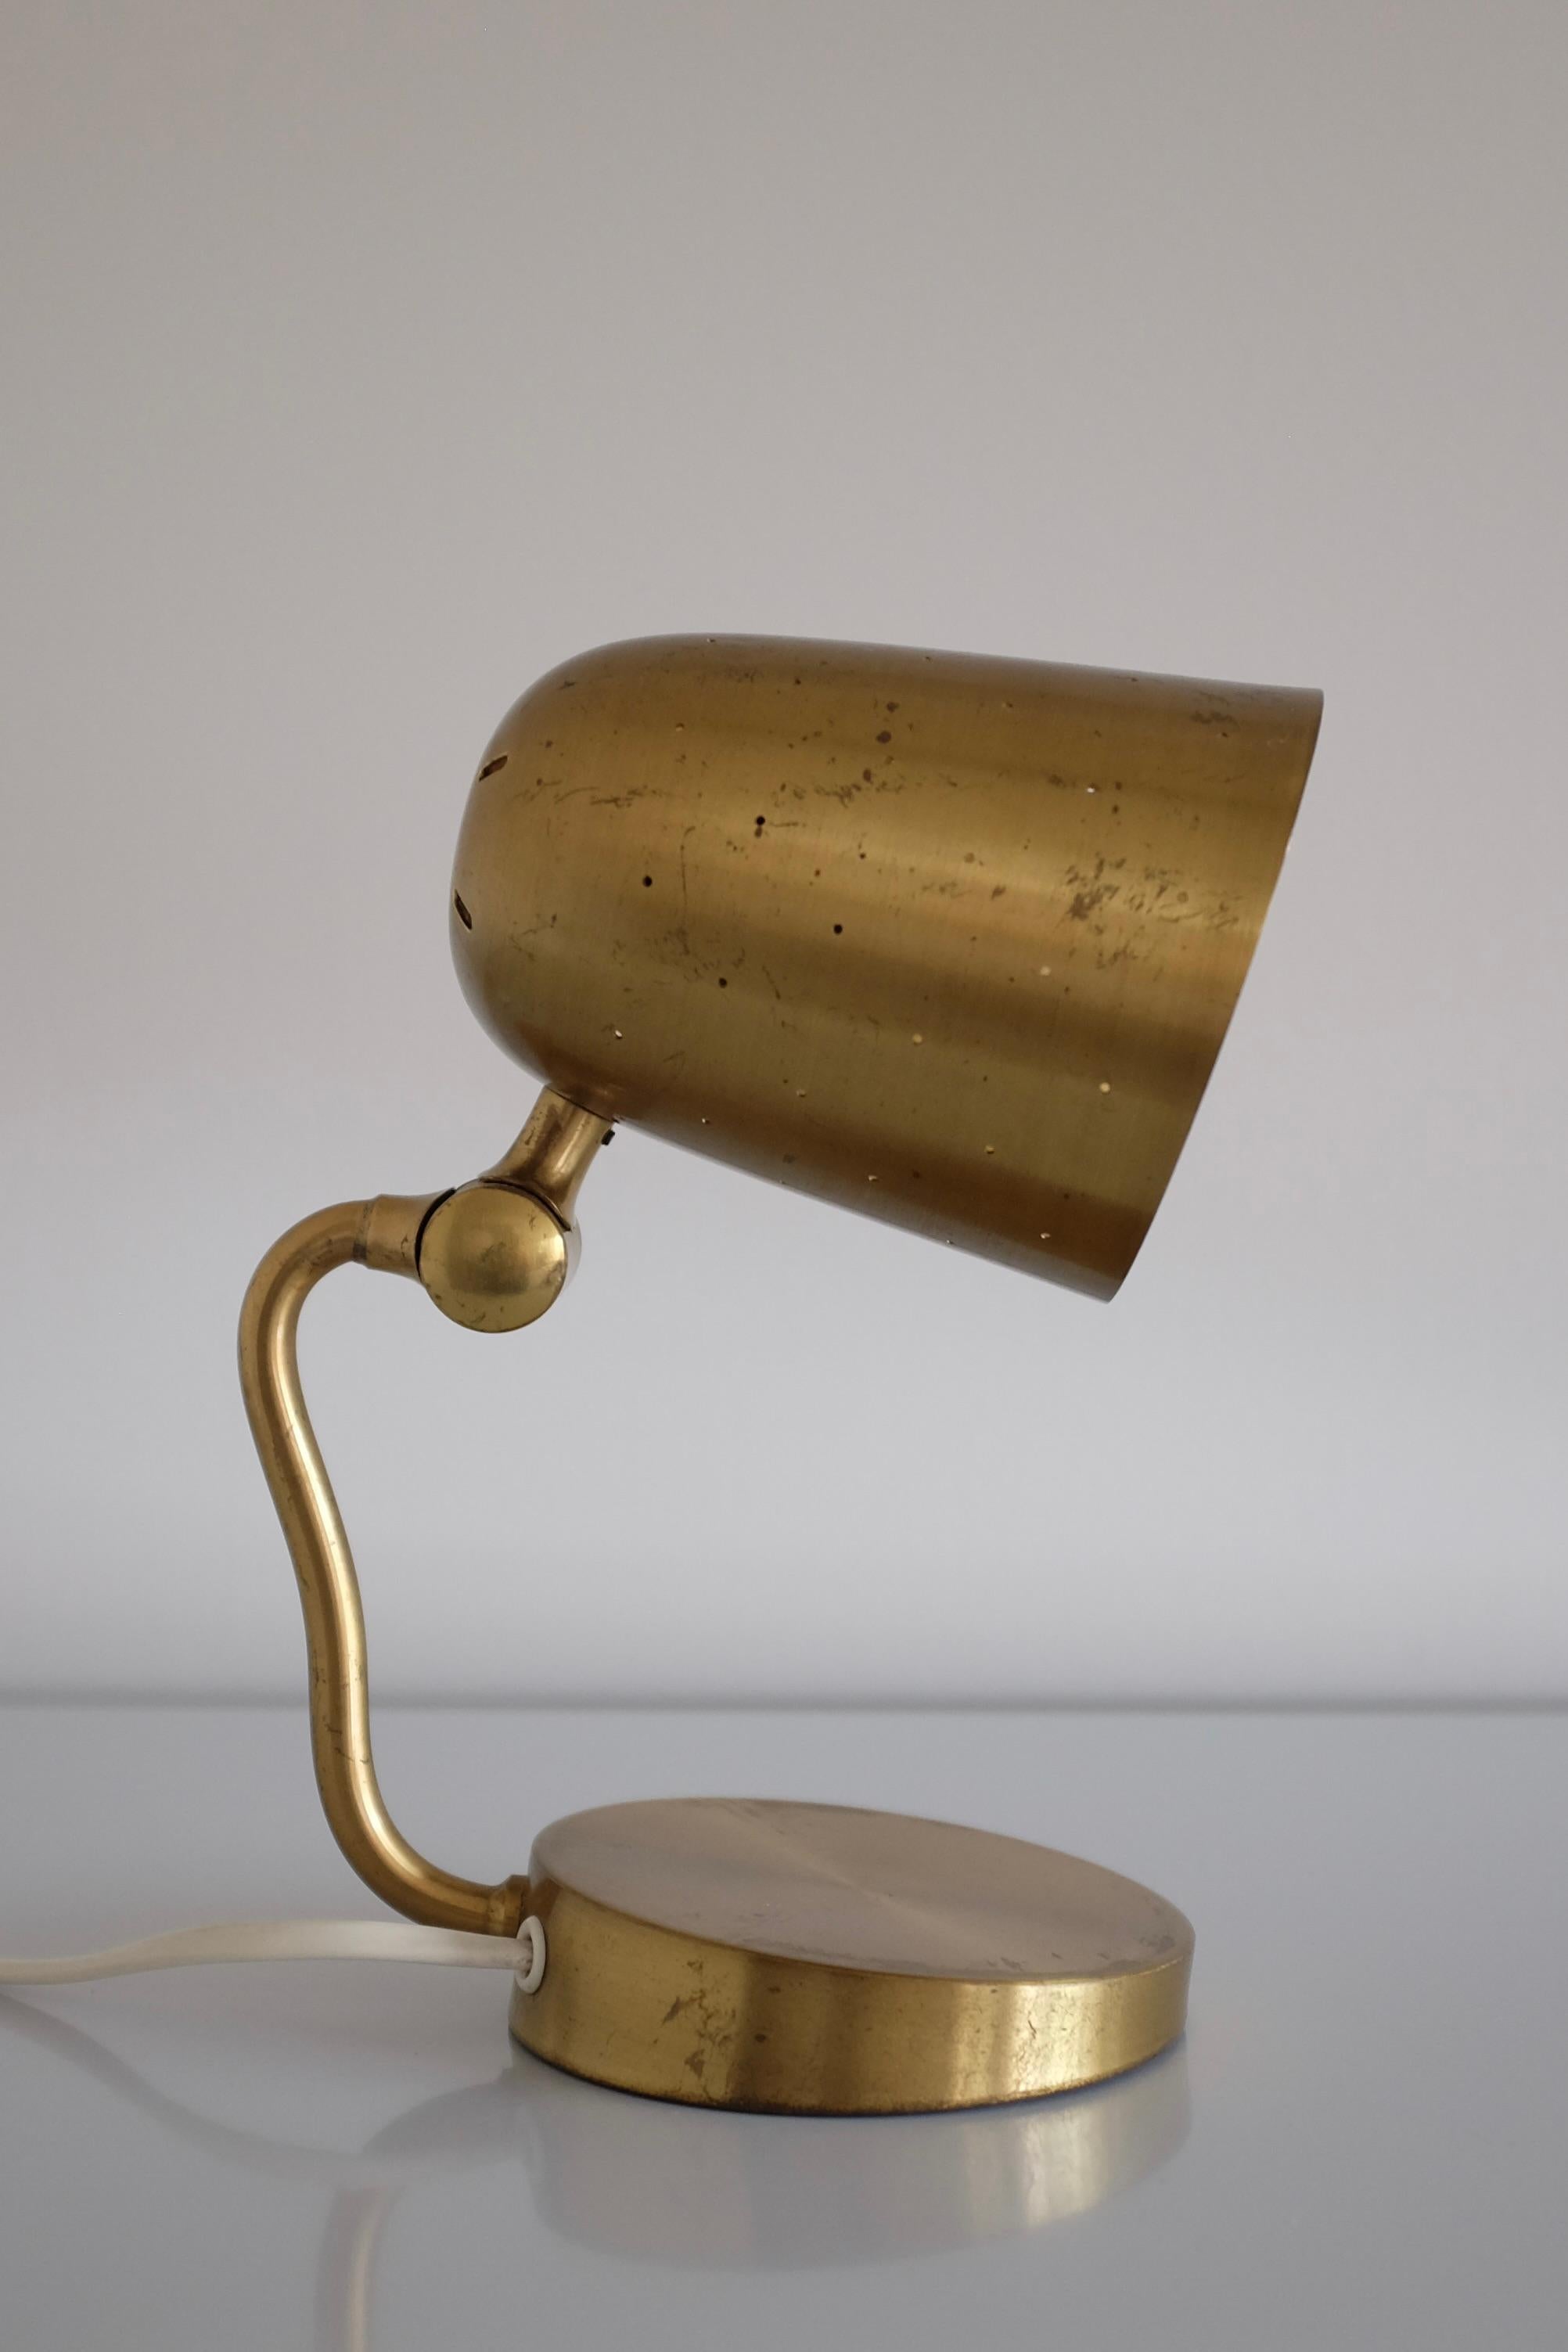 Charming Brass Table Lamps from Boréns, Sweden. This modell is called 9303 and from the 1950s. Flexible arm that can open and close the perforated lamp shade. The small even located holes on the shade gives a glowing light when turned on. Patina to